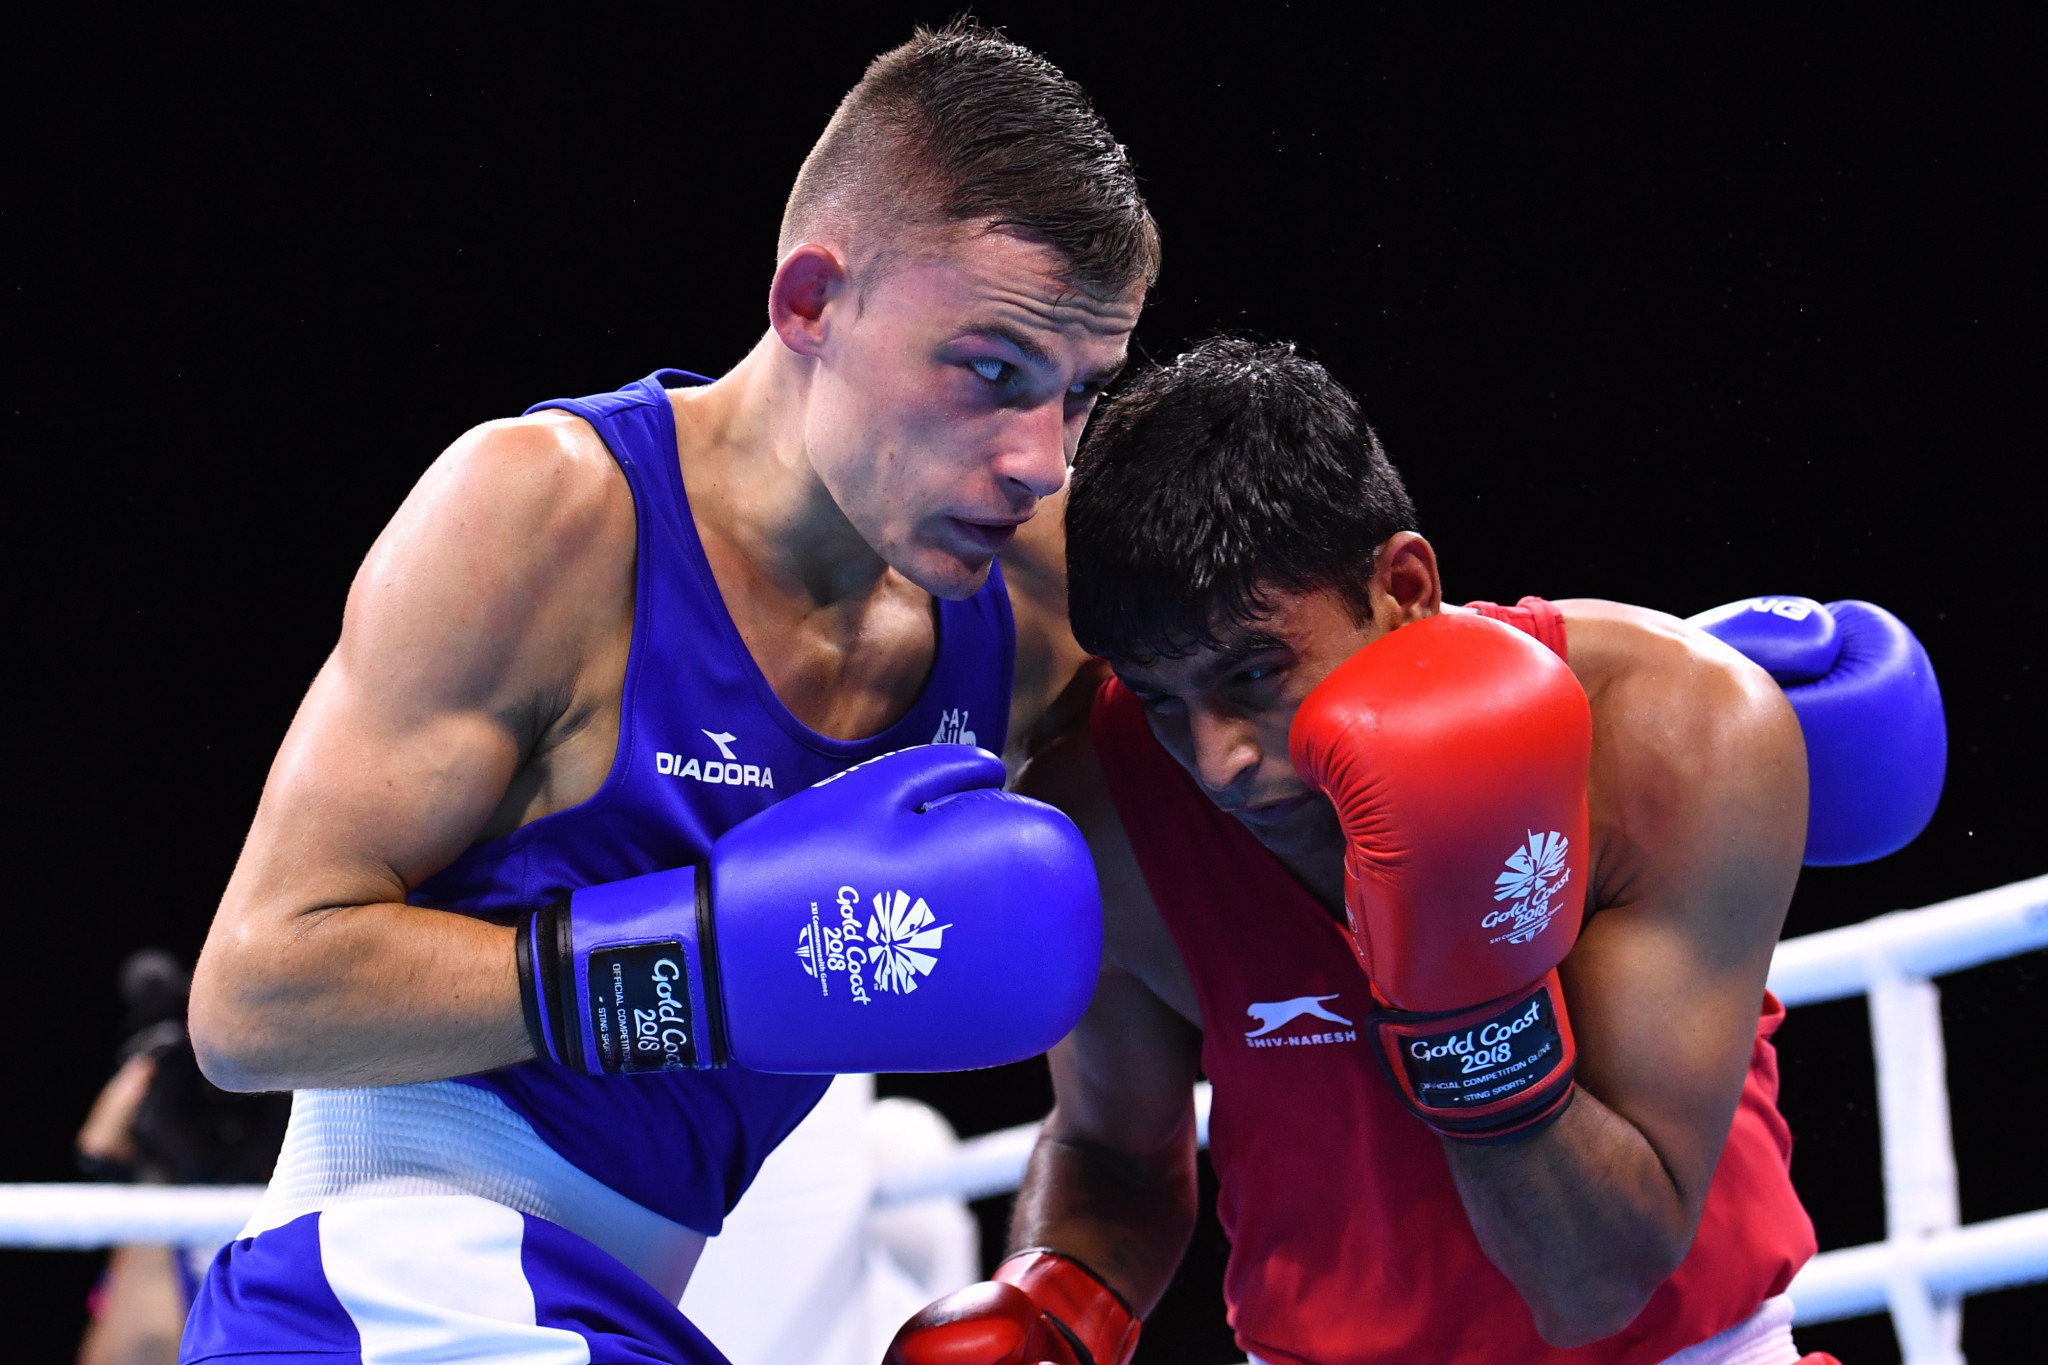 Harry Garside, left, won men's lightweight boxing gold for Australia at their home Commonwealth Games at Gold Coast 2018 ©Getty Images